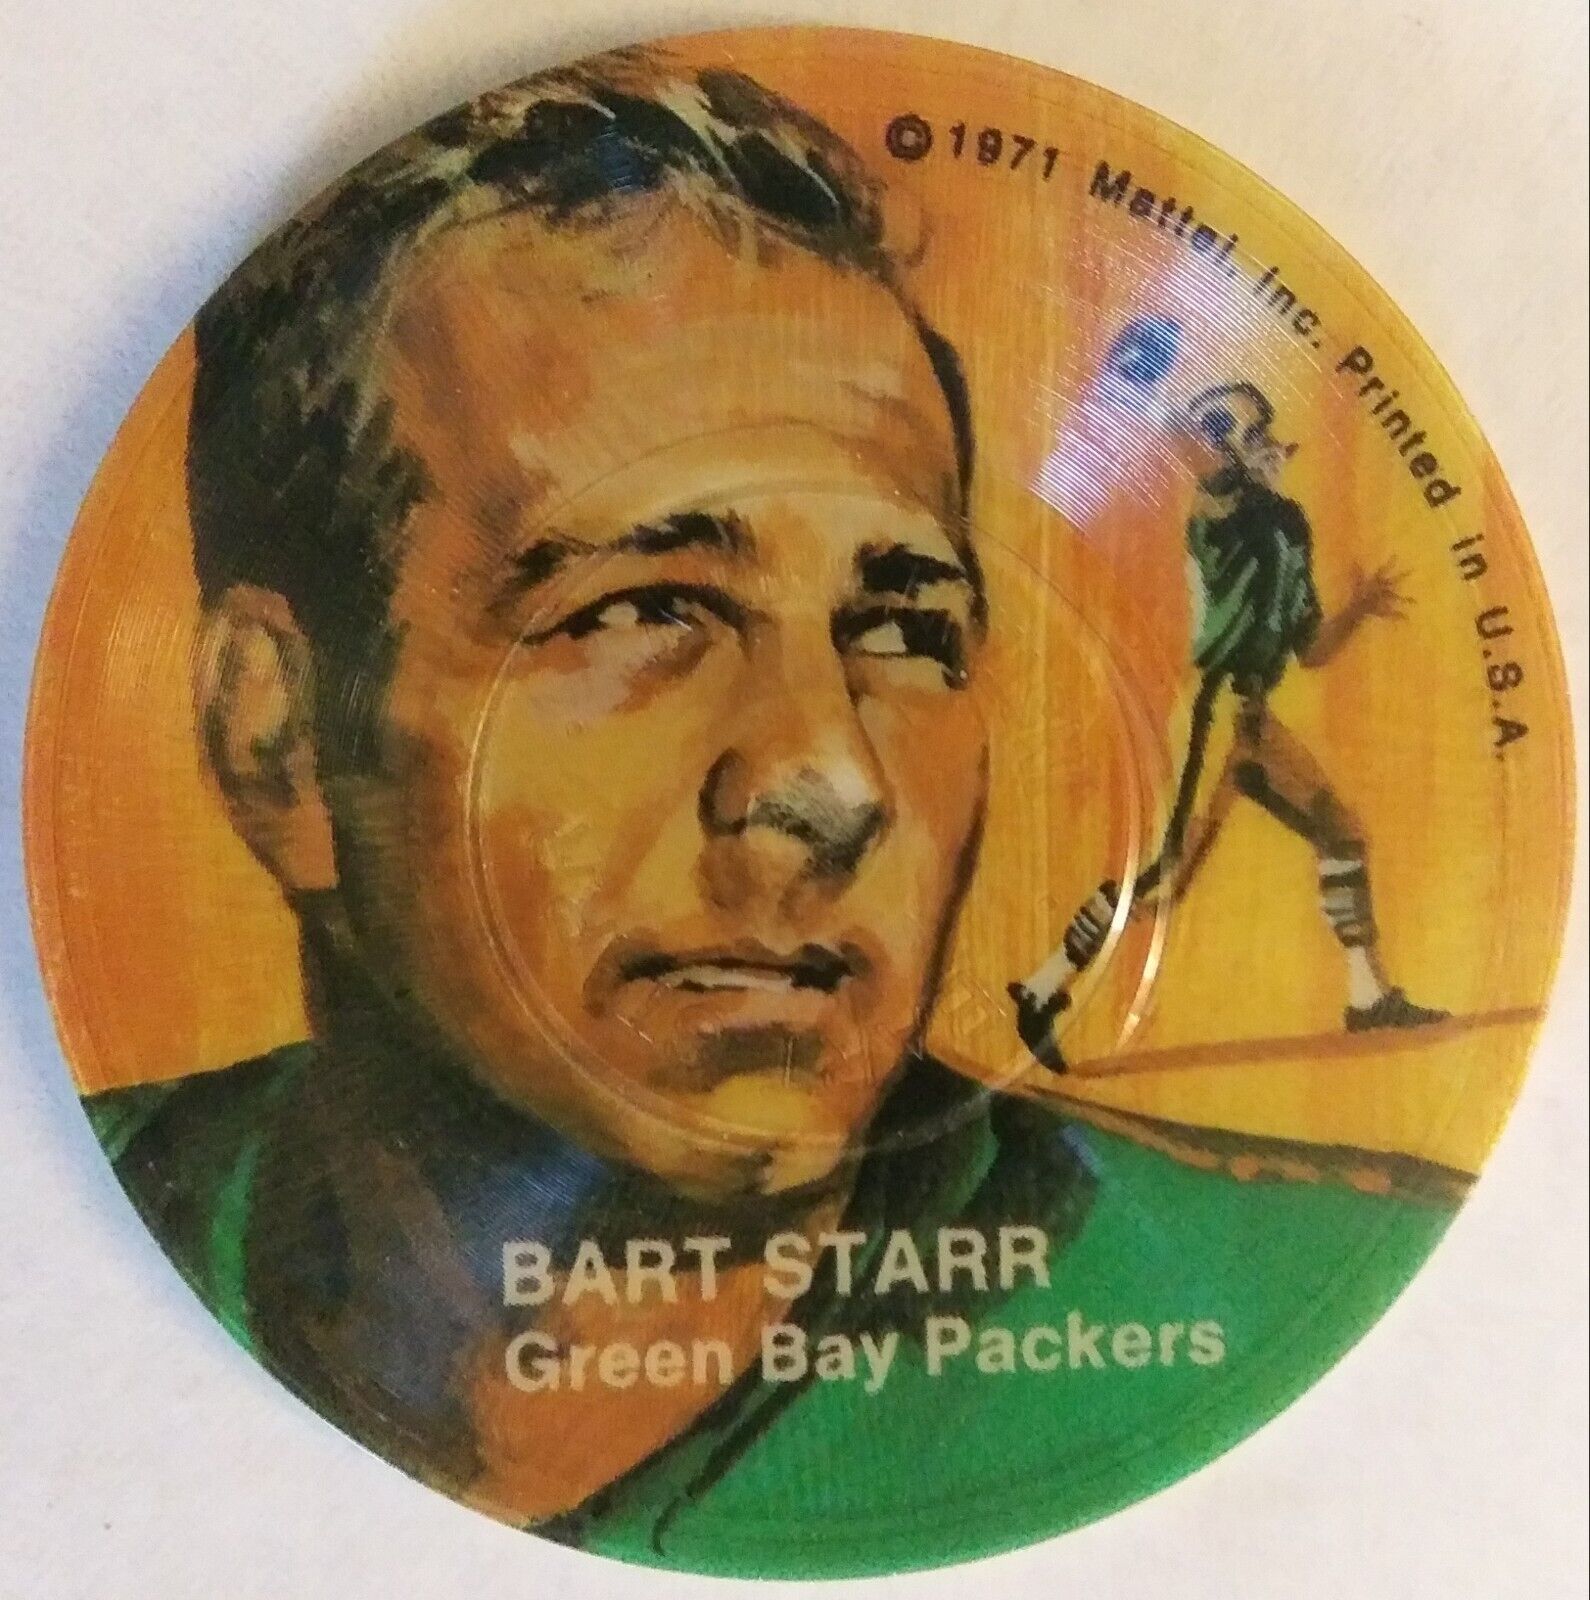 1971 Mattel Instant Replay BART STARR Double-Sided Mini Record - Light Play Wear